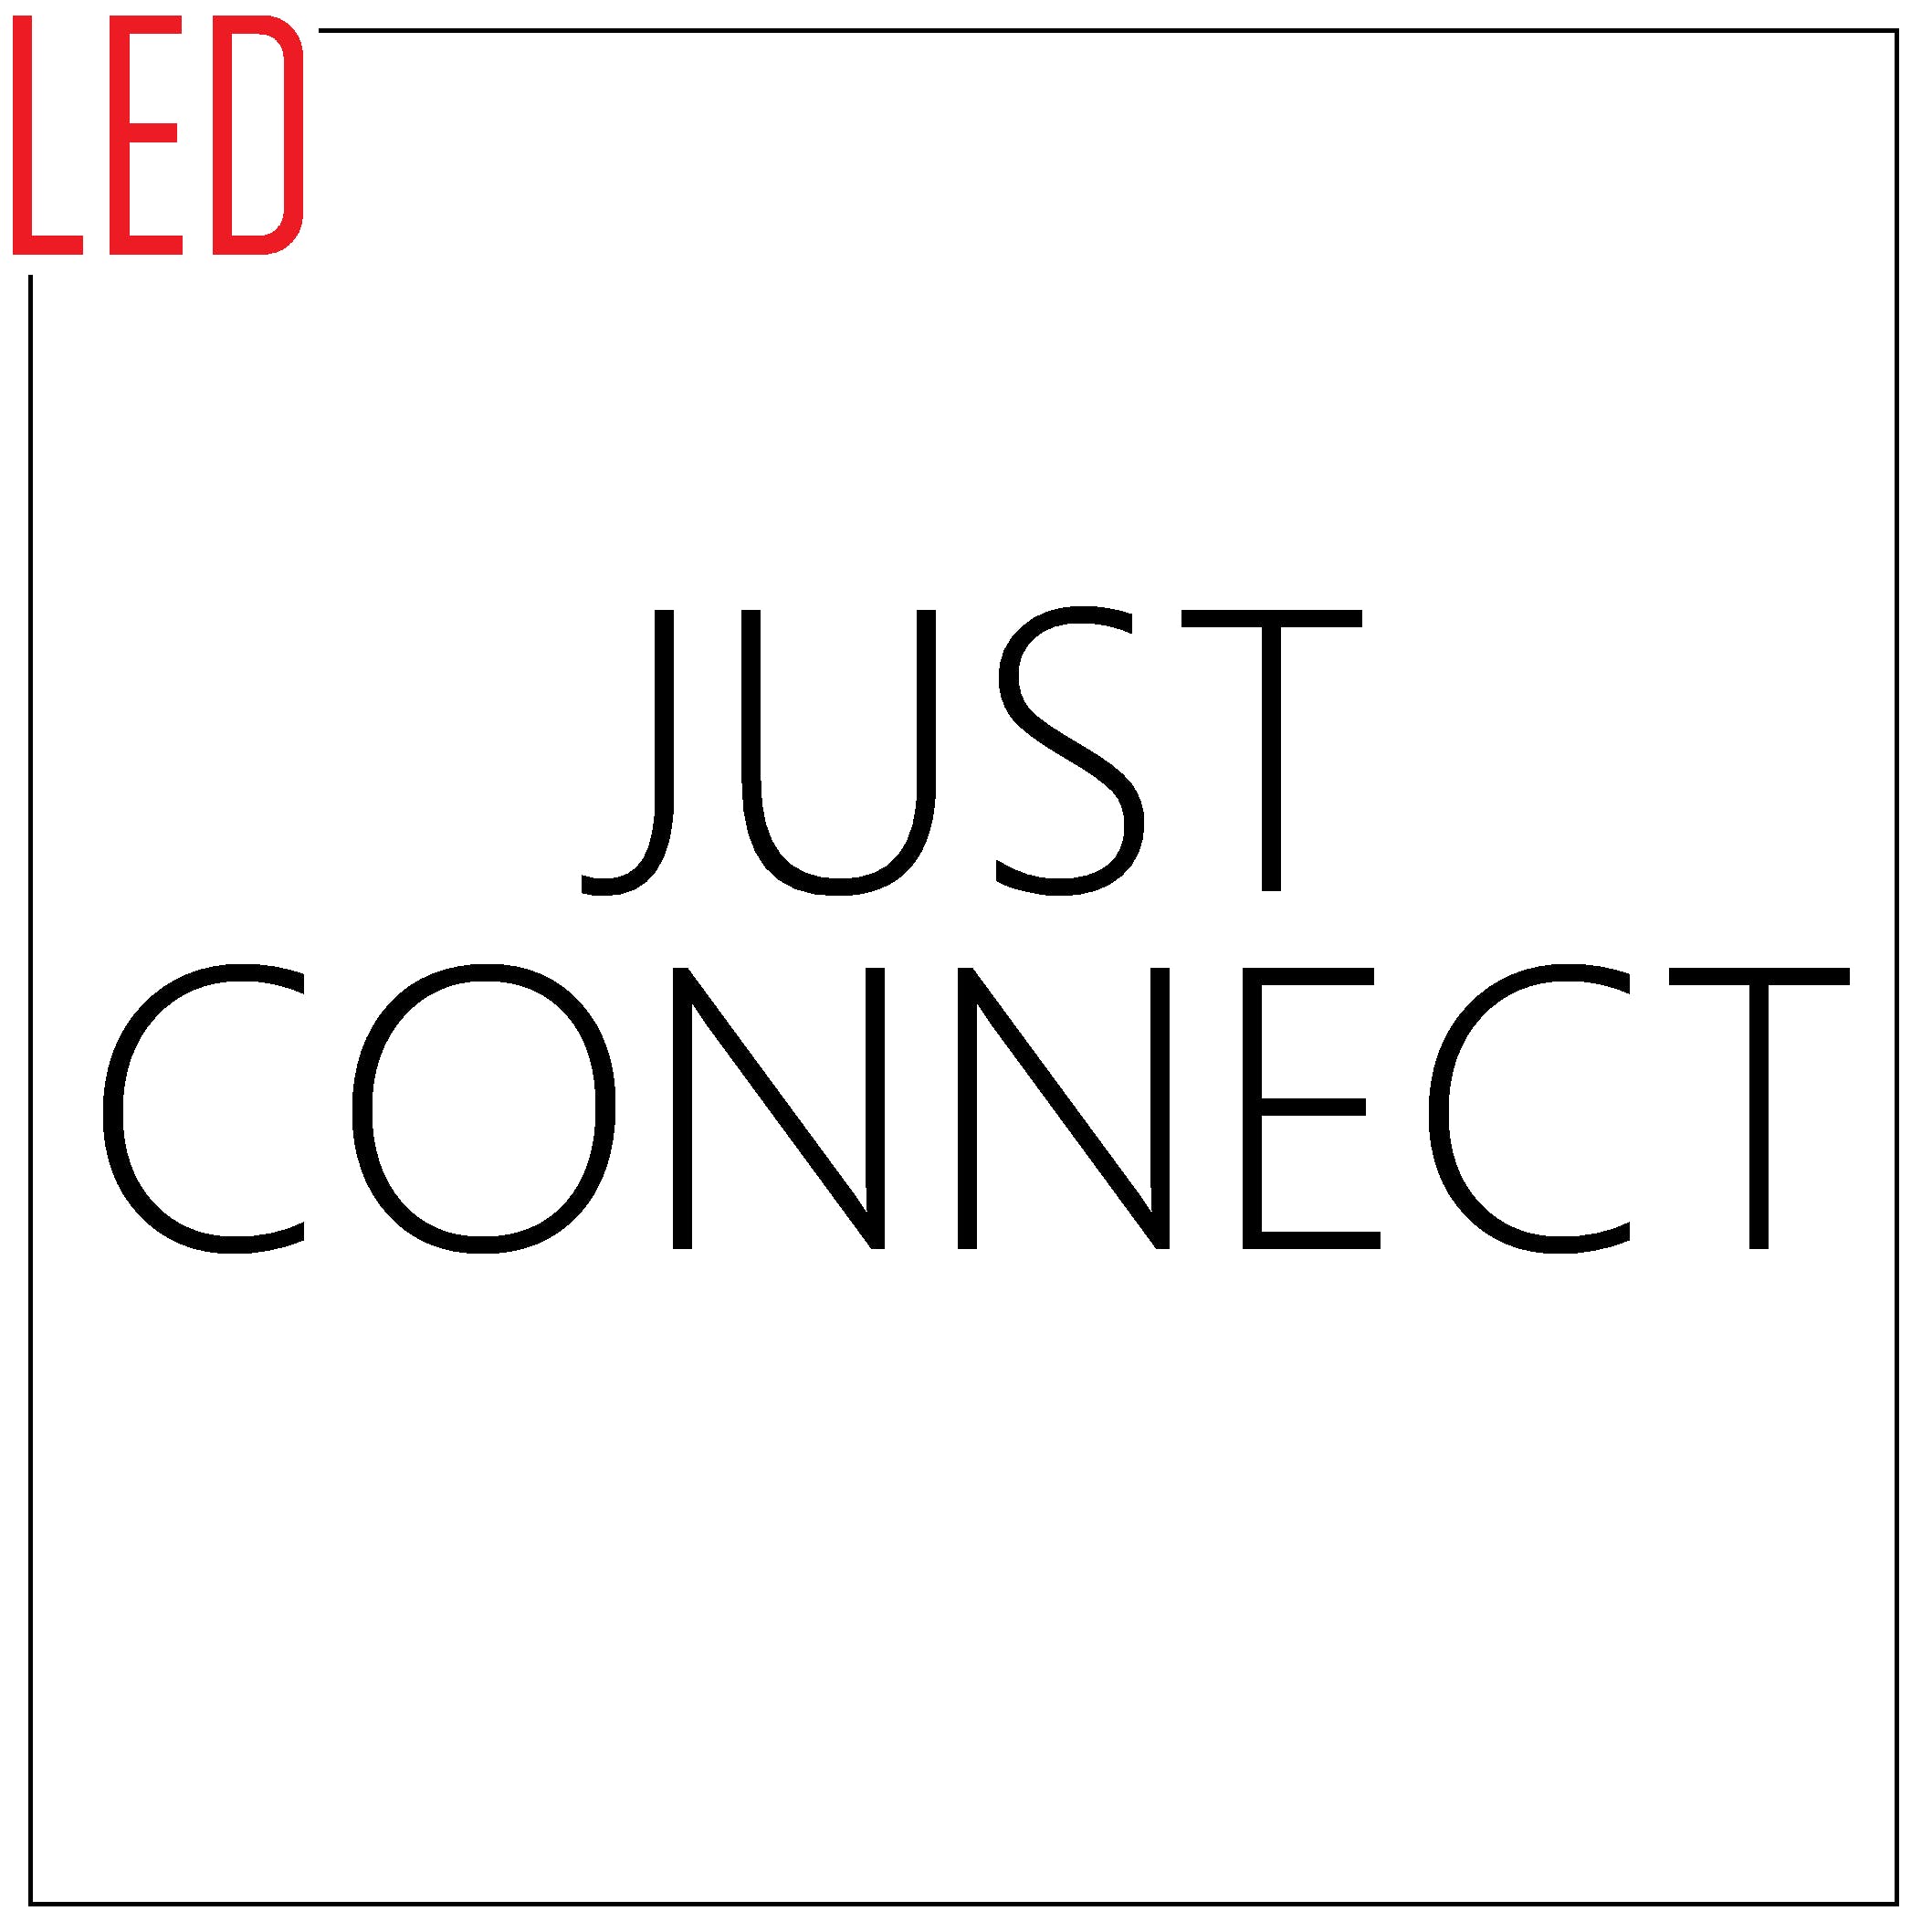 Just Connect - Networking for Introverts with Dushka Zapata, Top Quora Writer, Author, Executive Coach media 1